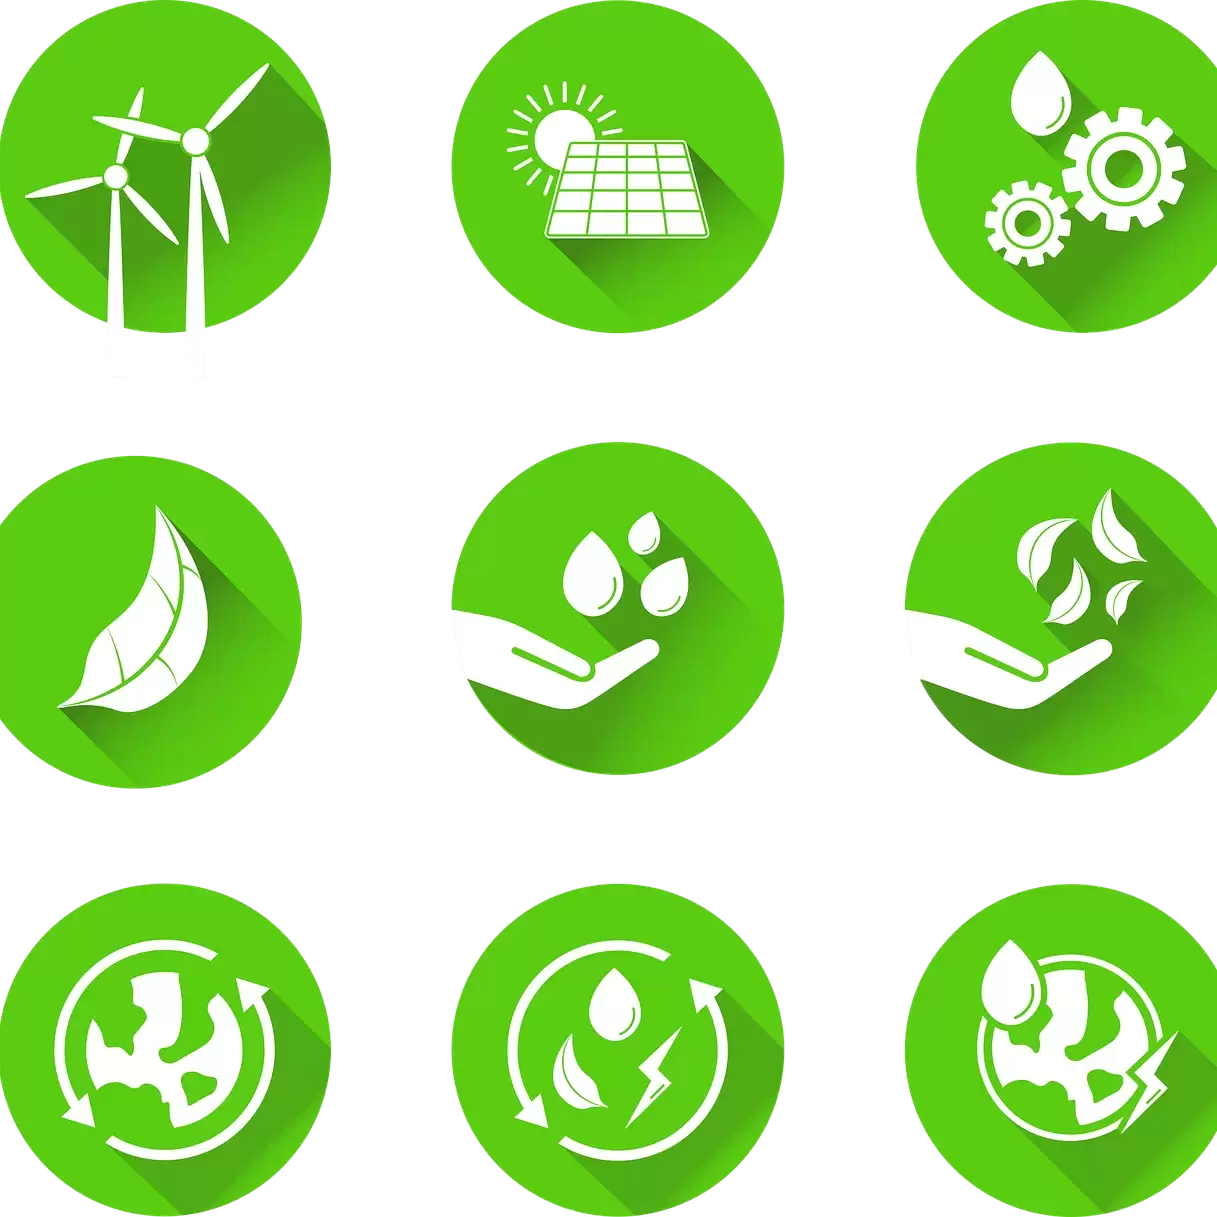 Green energy symbols to remind people how to help the environment